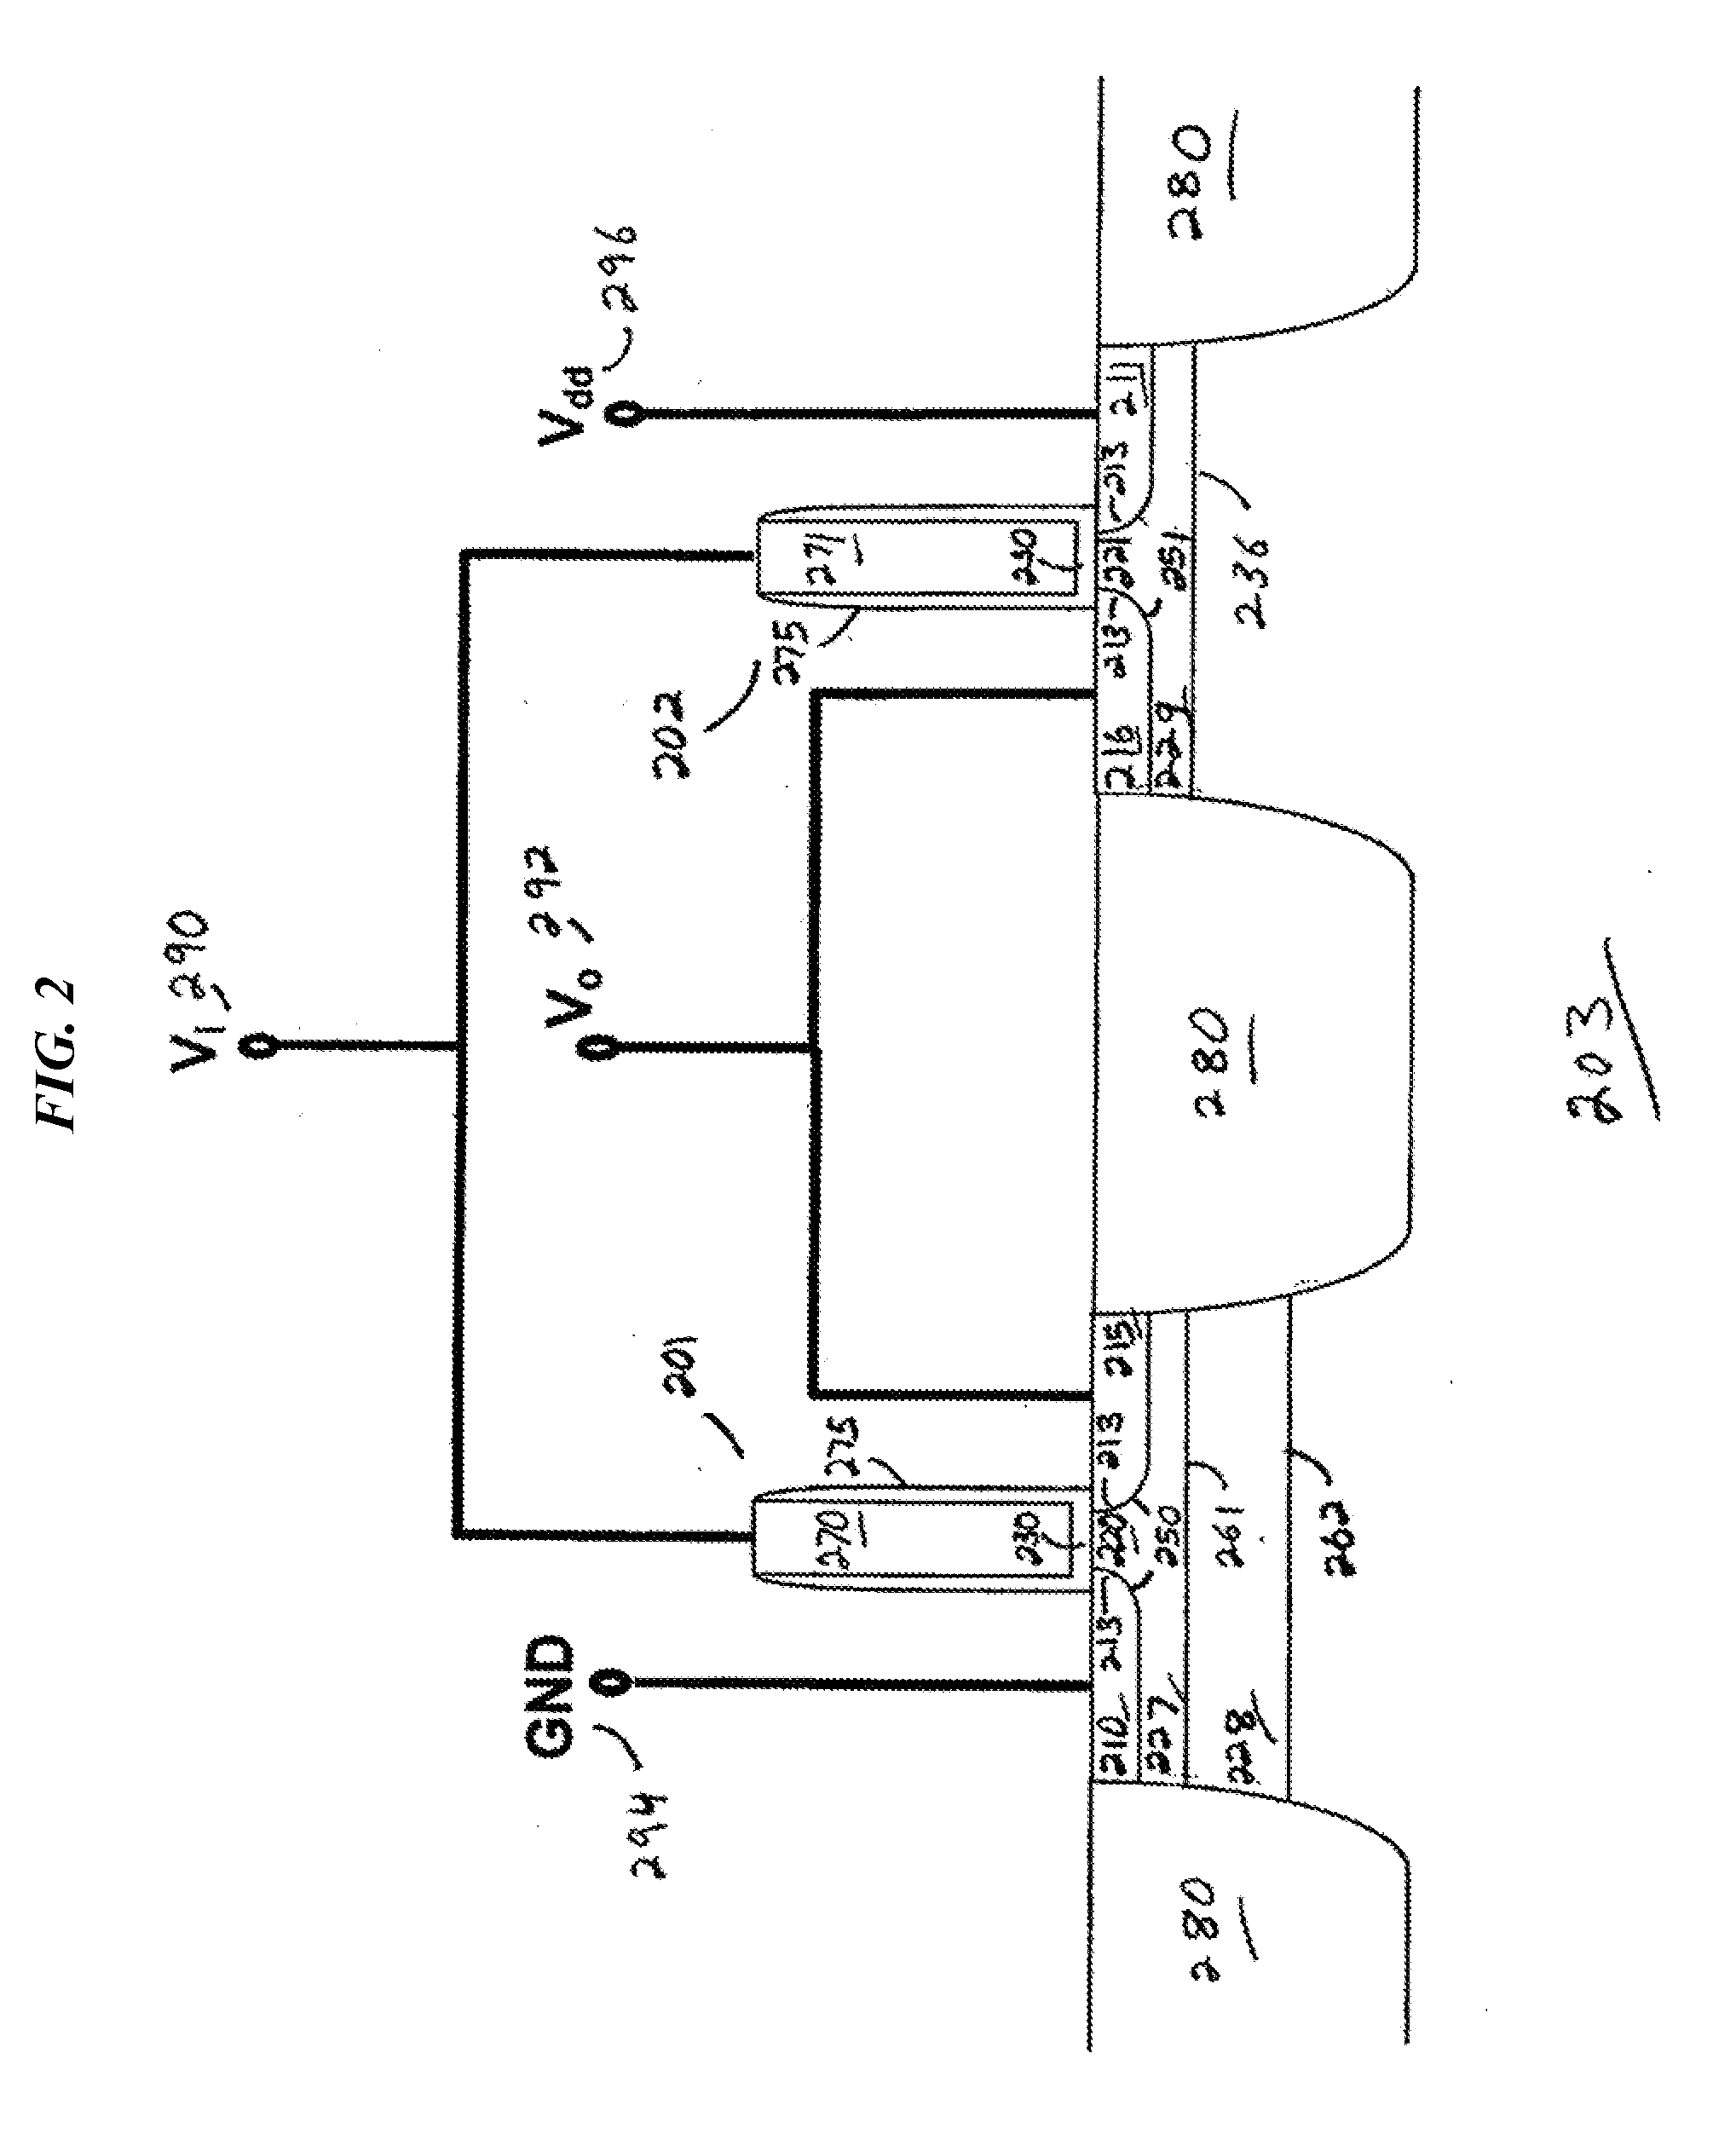 Method of manufacturing a CMOS device with zero soft error rate